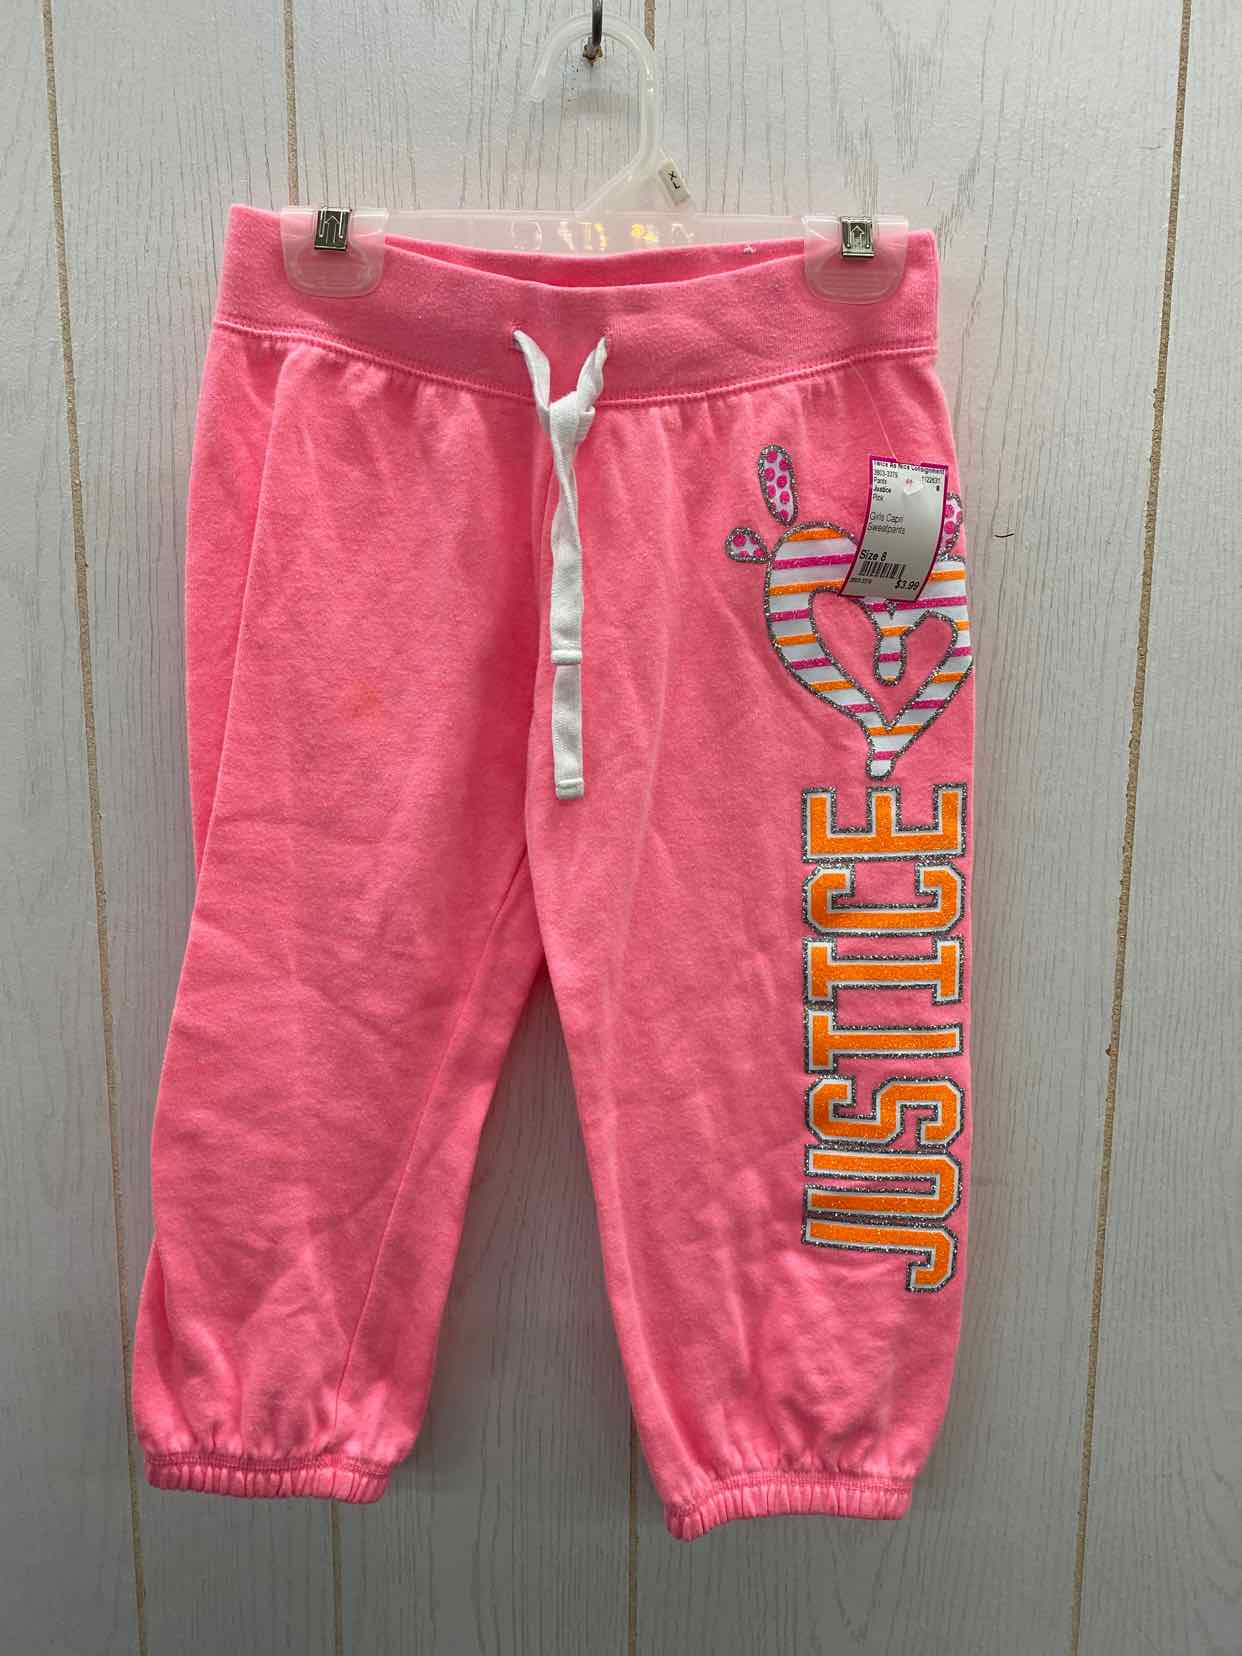 Justice Girls Size 8 Pants